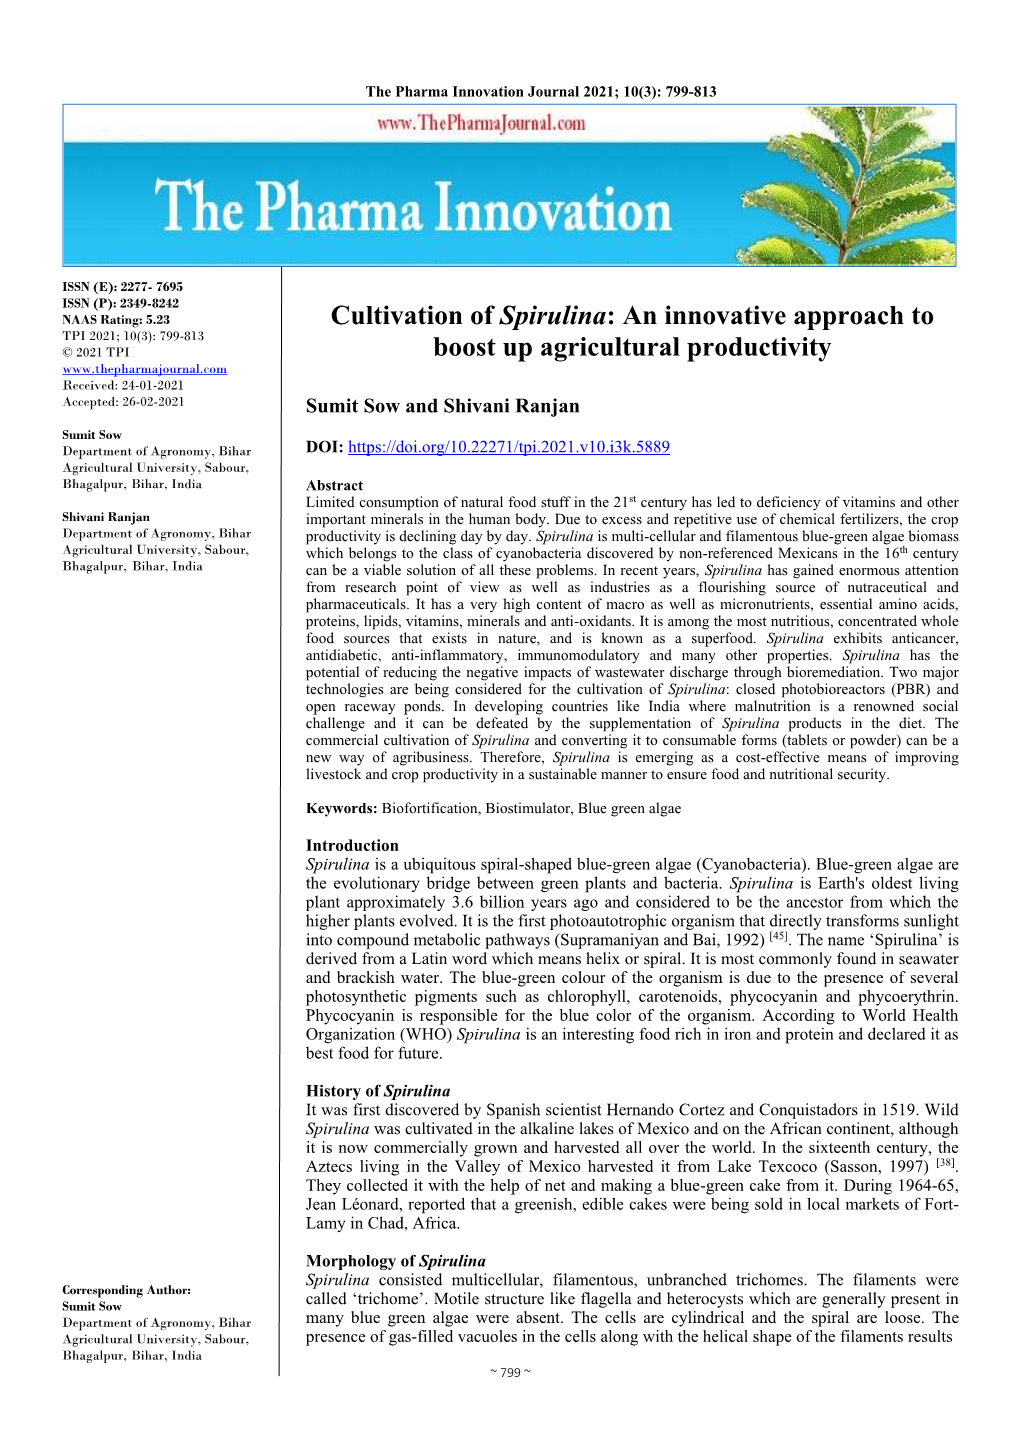 Cultivation of Spirulina: an Innovative Approach to Boost up Agricultural